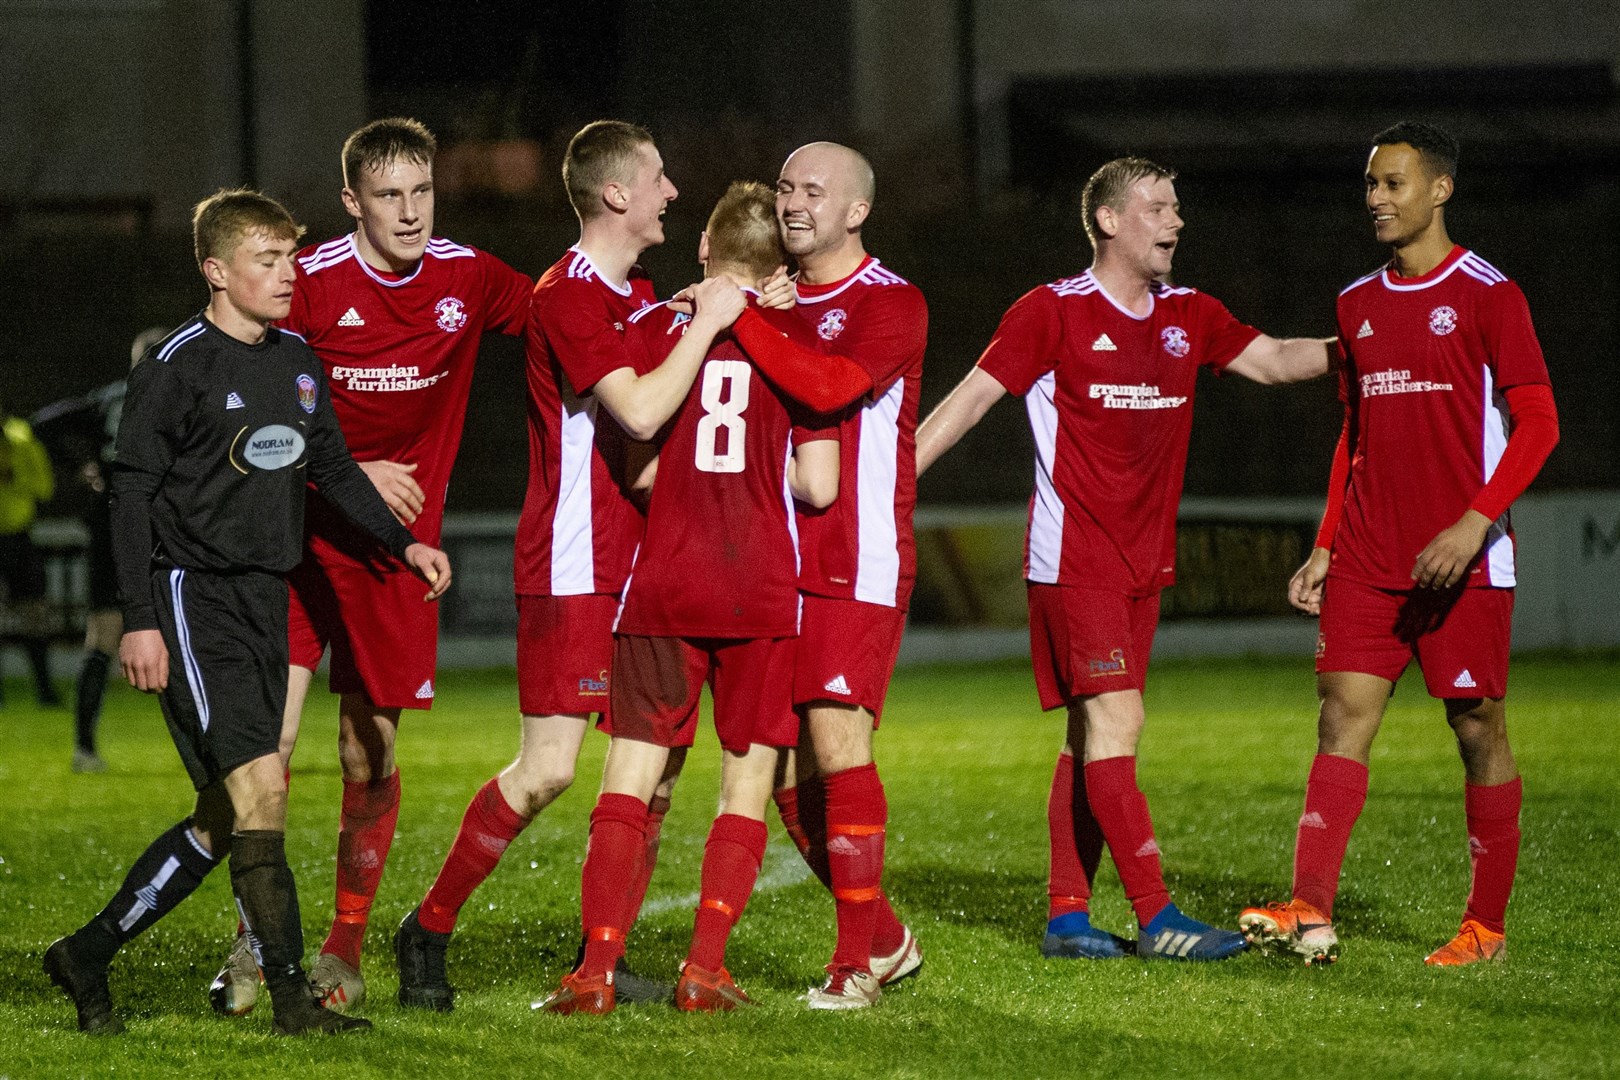 A number of Lossiemouth players, pictured here celebrating against Fort William, have signed contract extensions. Picture: Daniel Forsyth